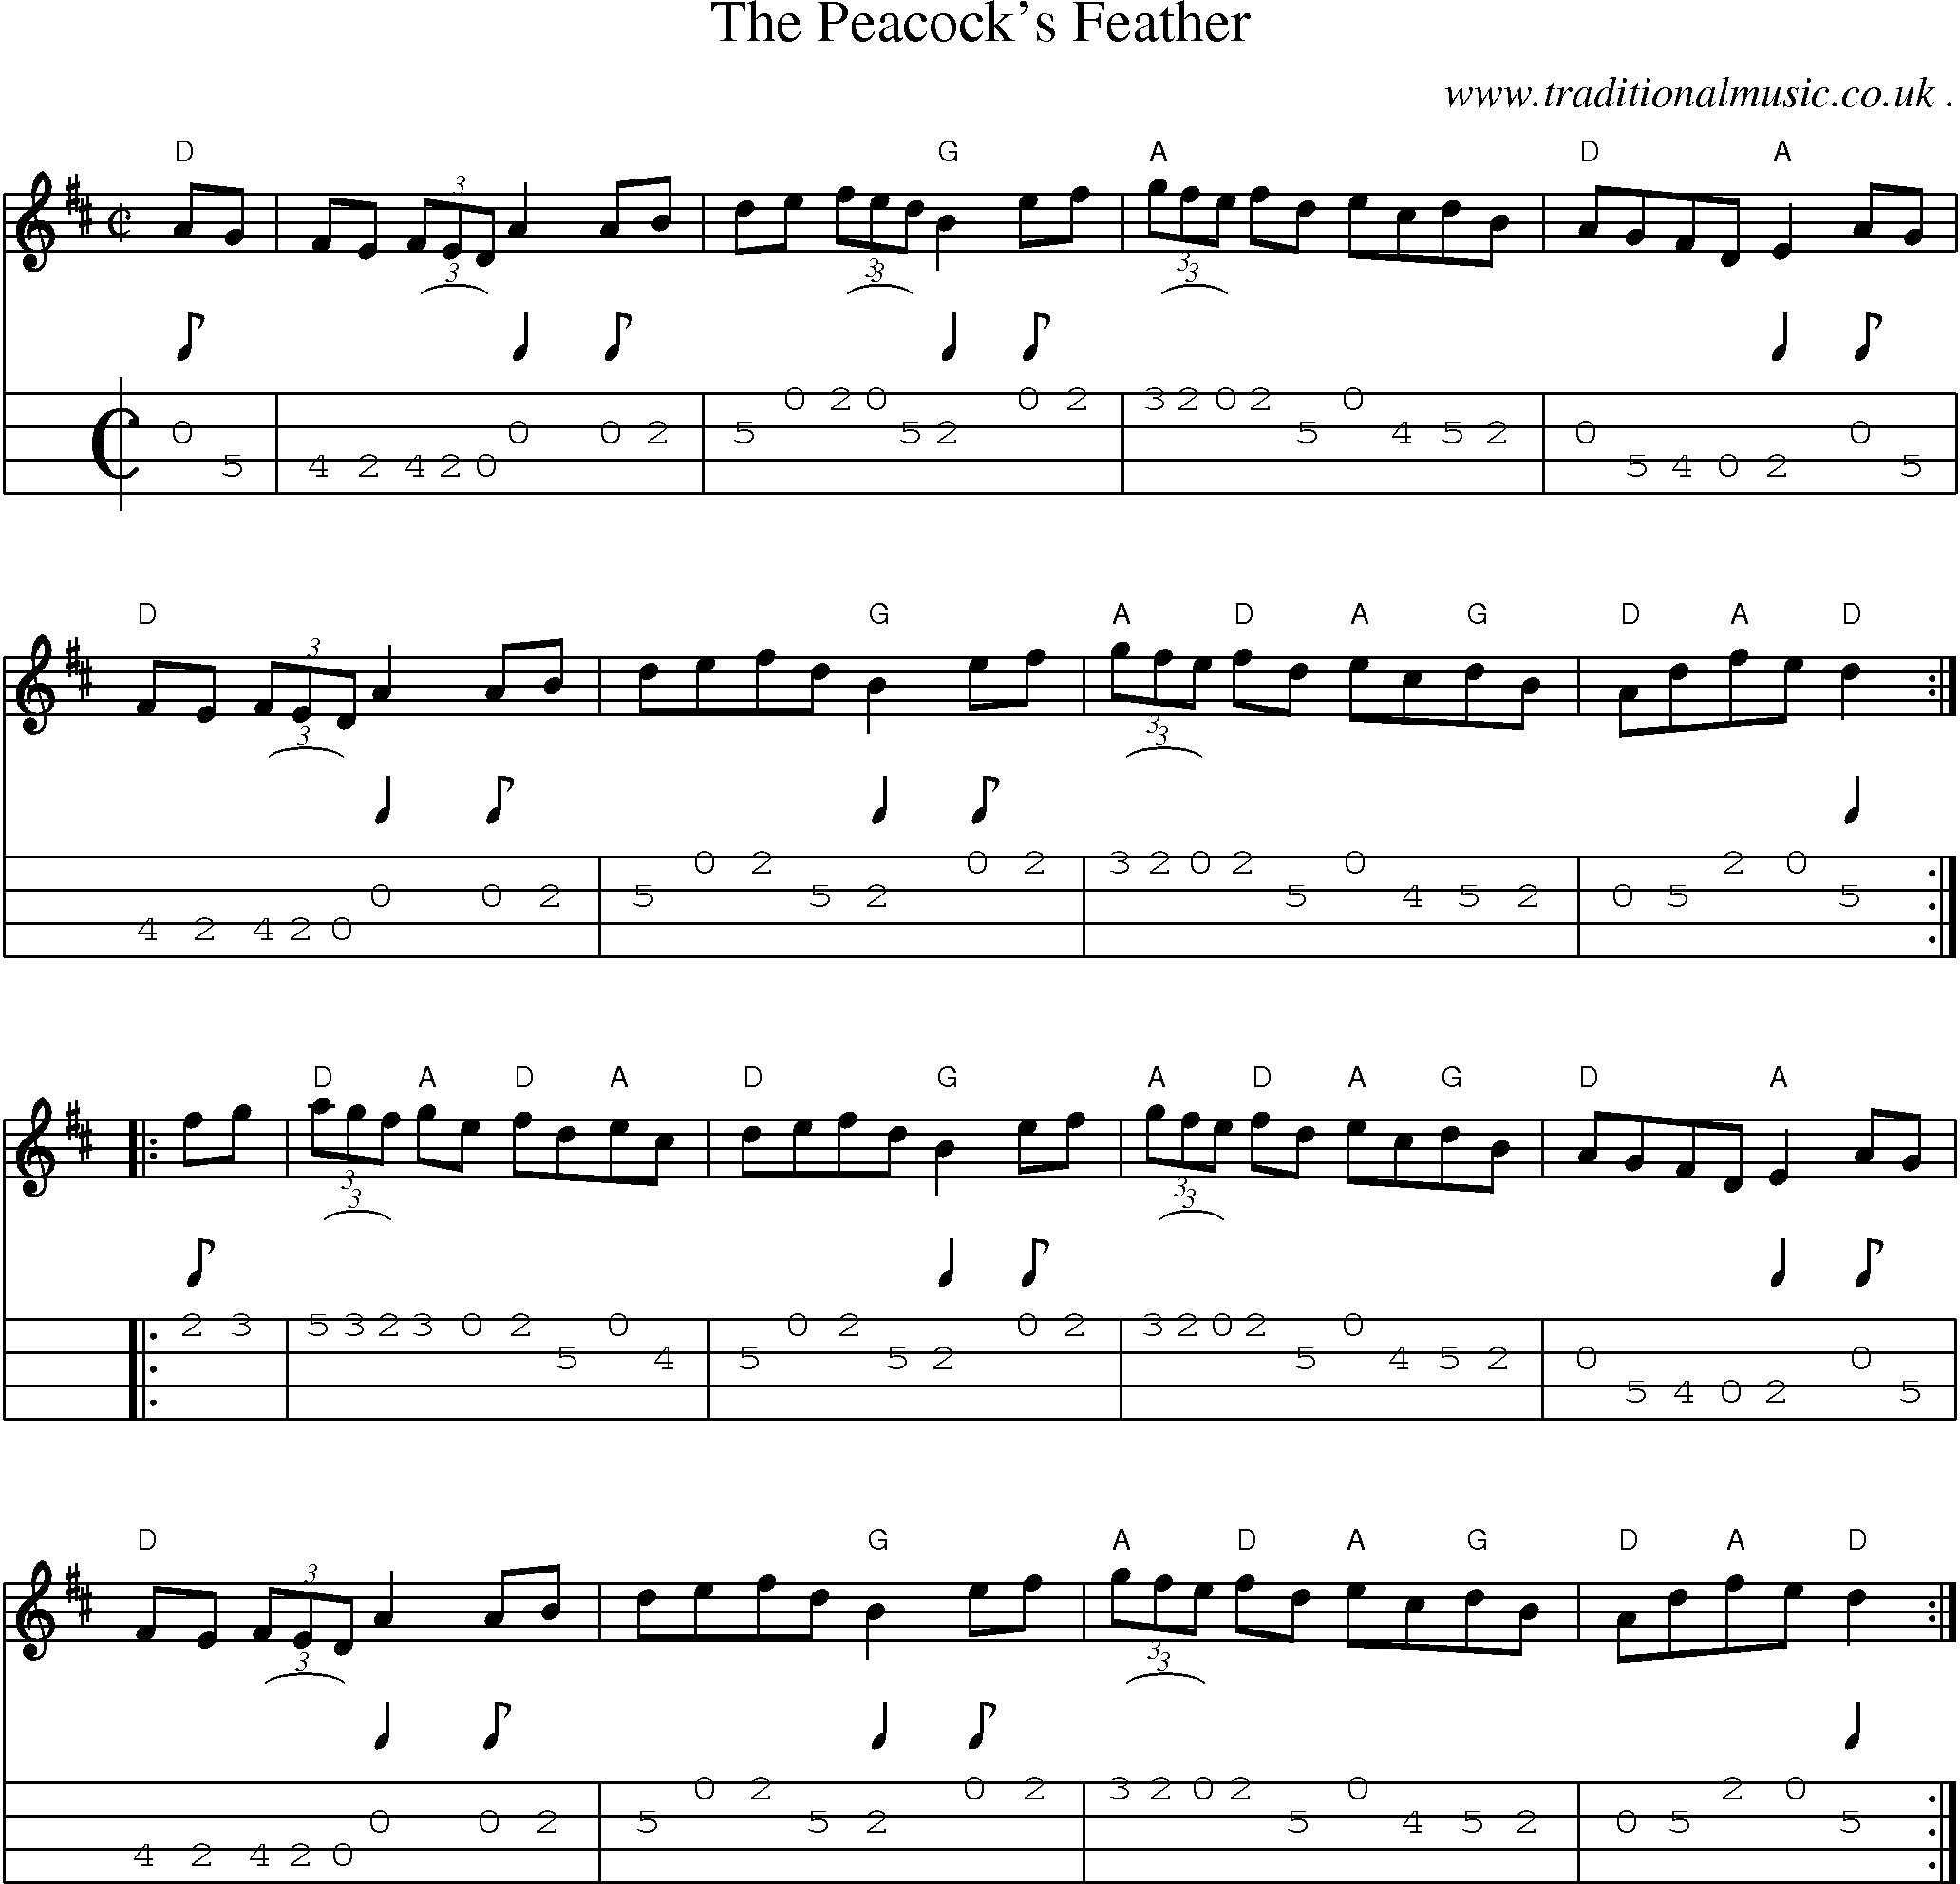 Music Score and Guitar Tabs for The Peacocks Feather